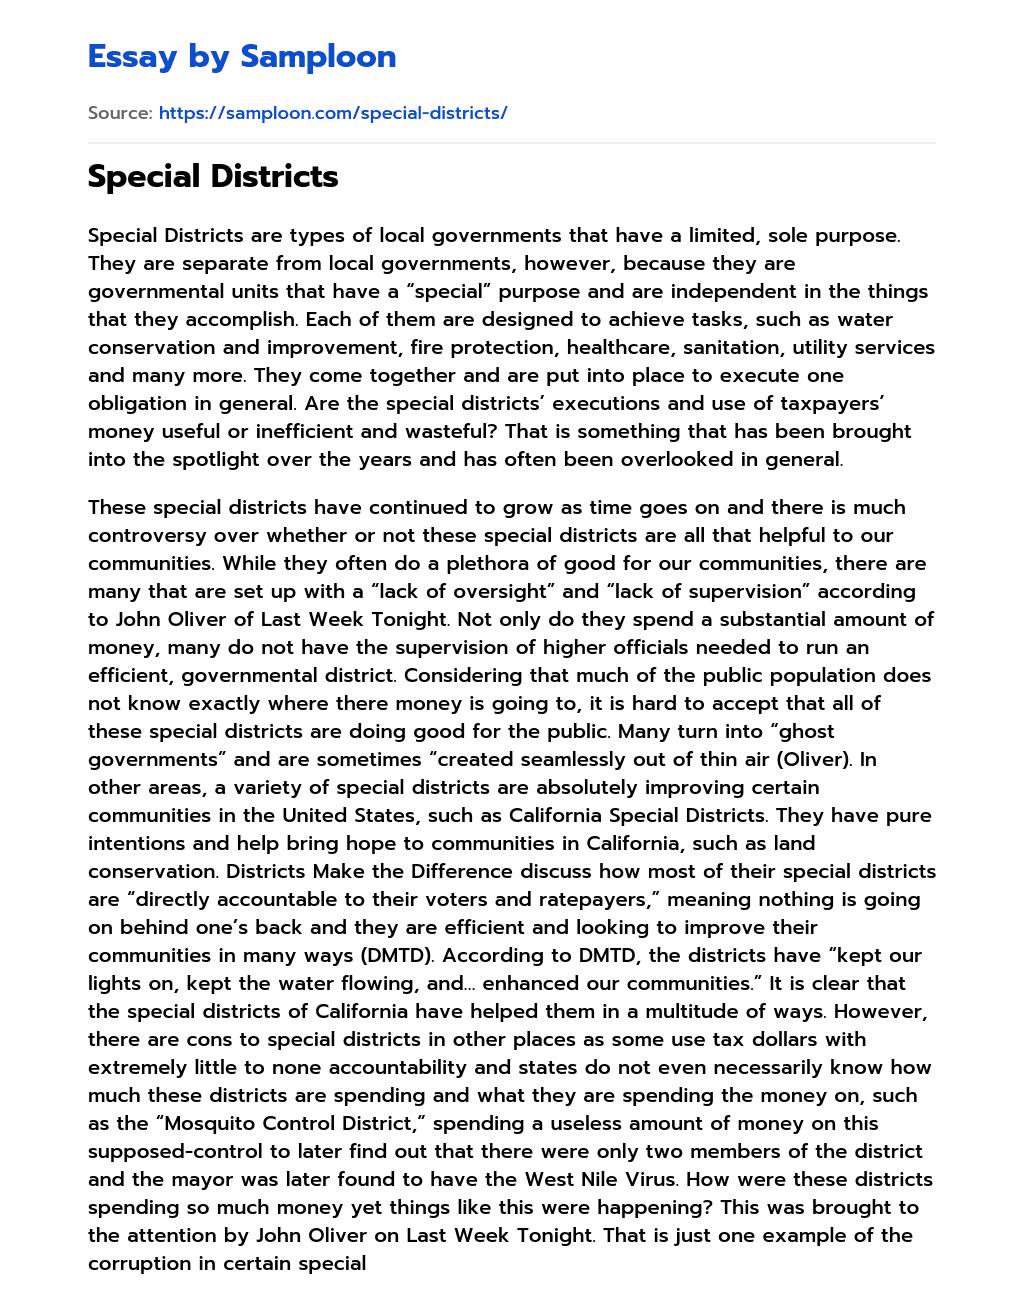 Special Districts essay